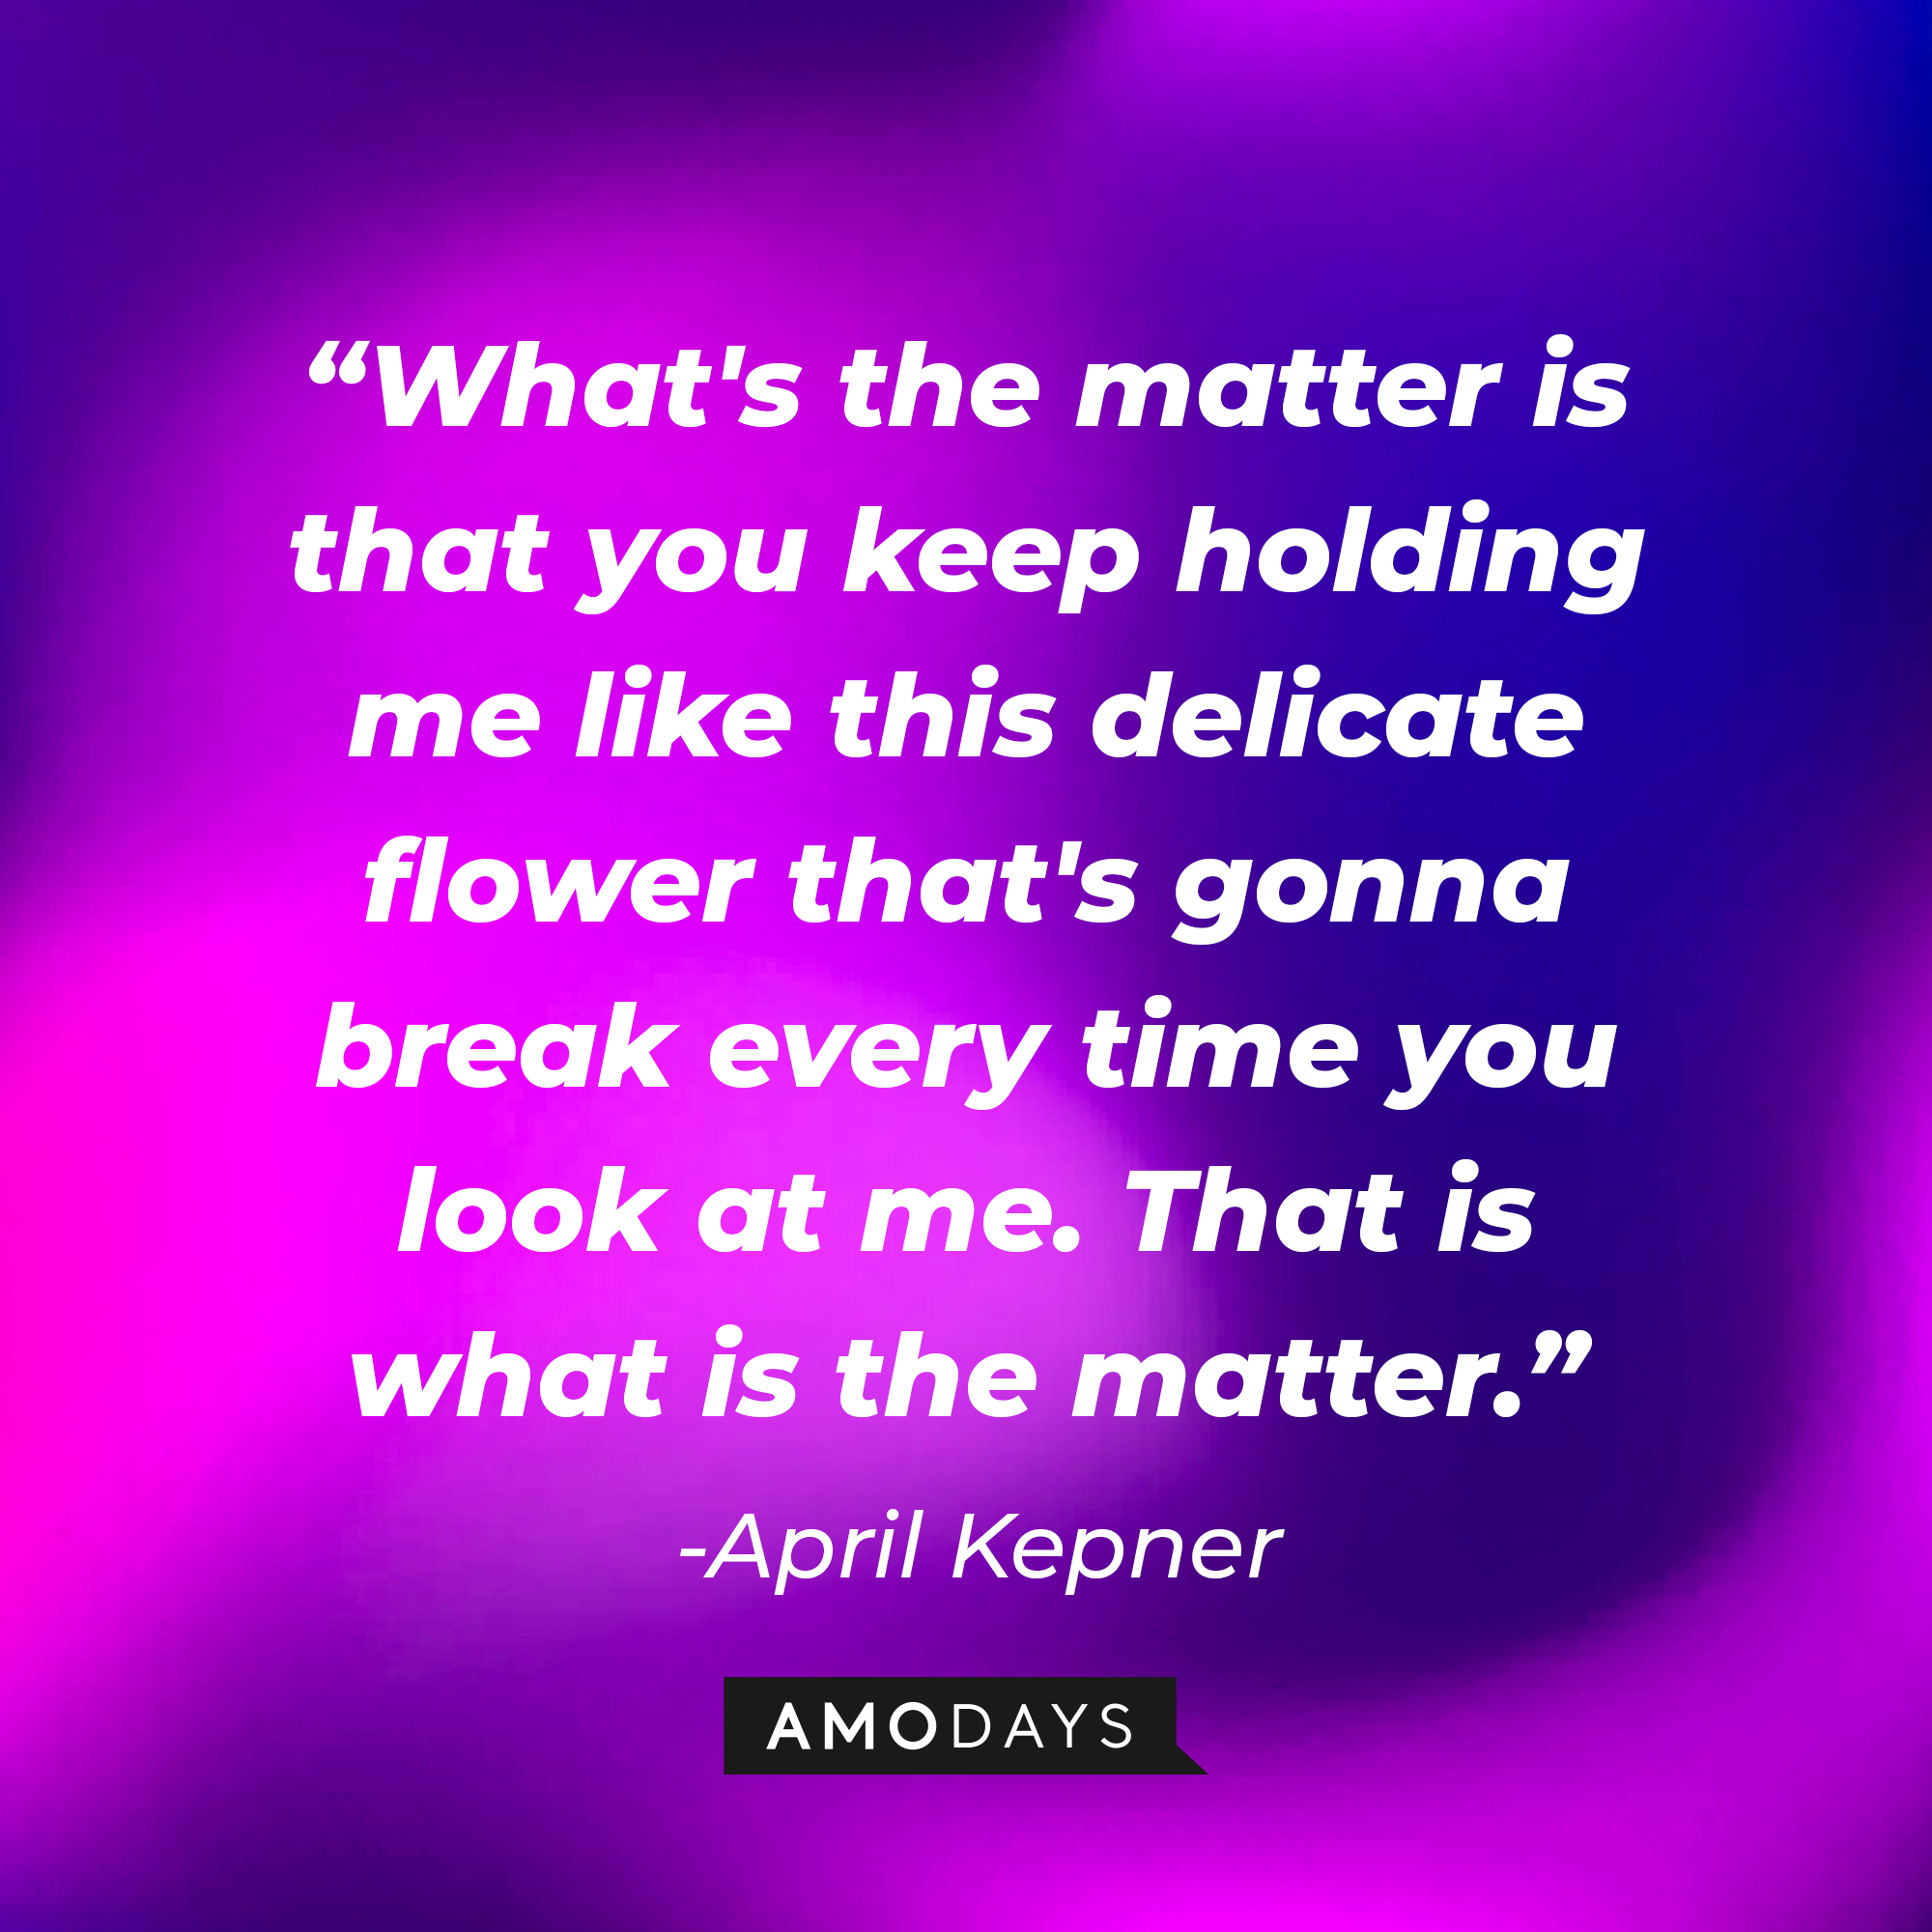 April Kepner's quote: "What's the matter is that you keep holding me like this delicate flower that's gonna break every time you look at me. That is what is the matter." | Source: AmoDays